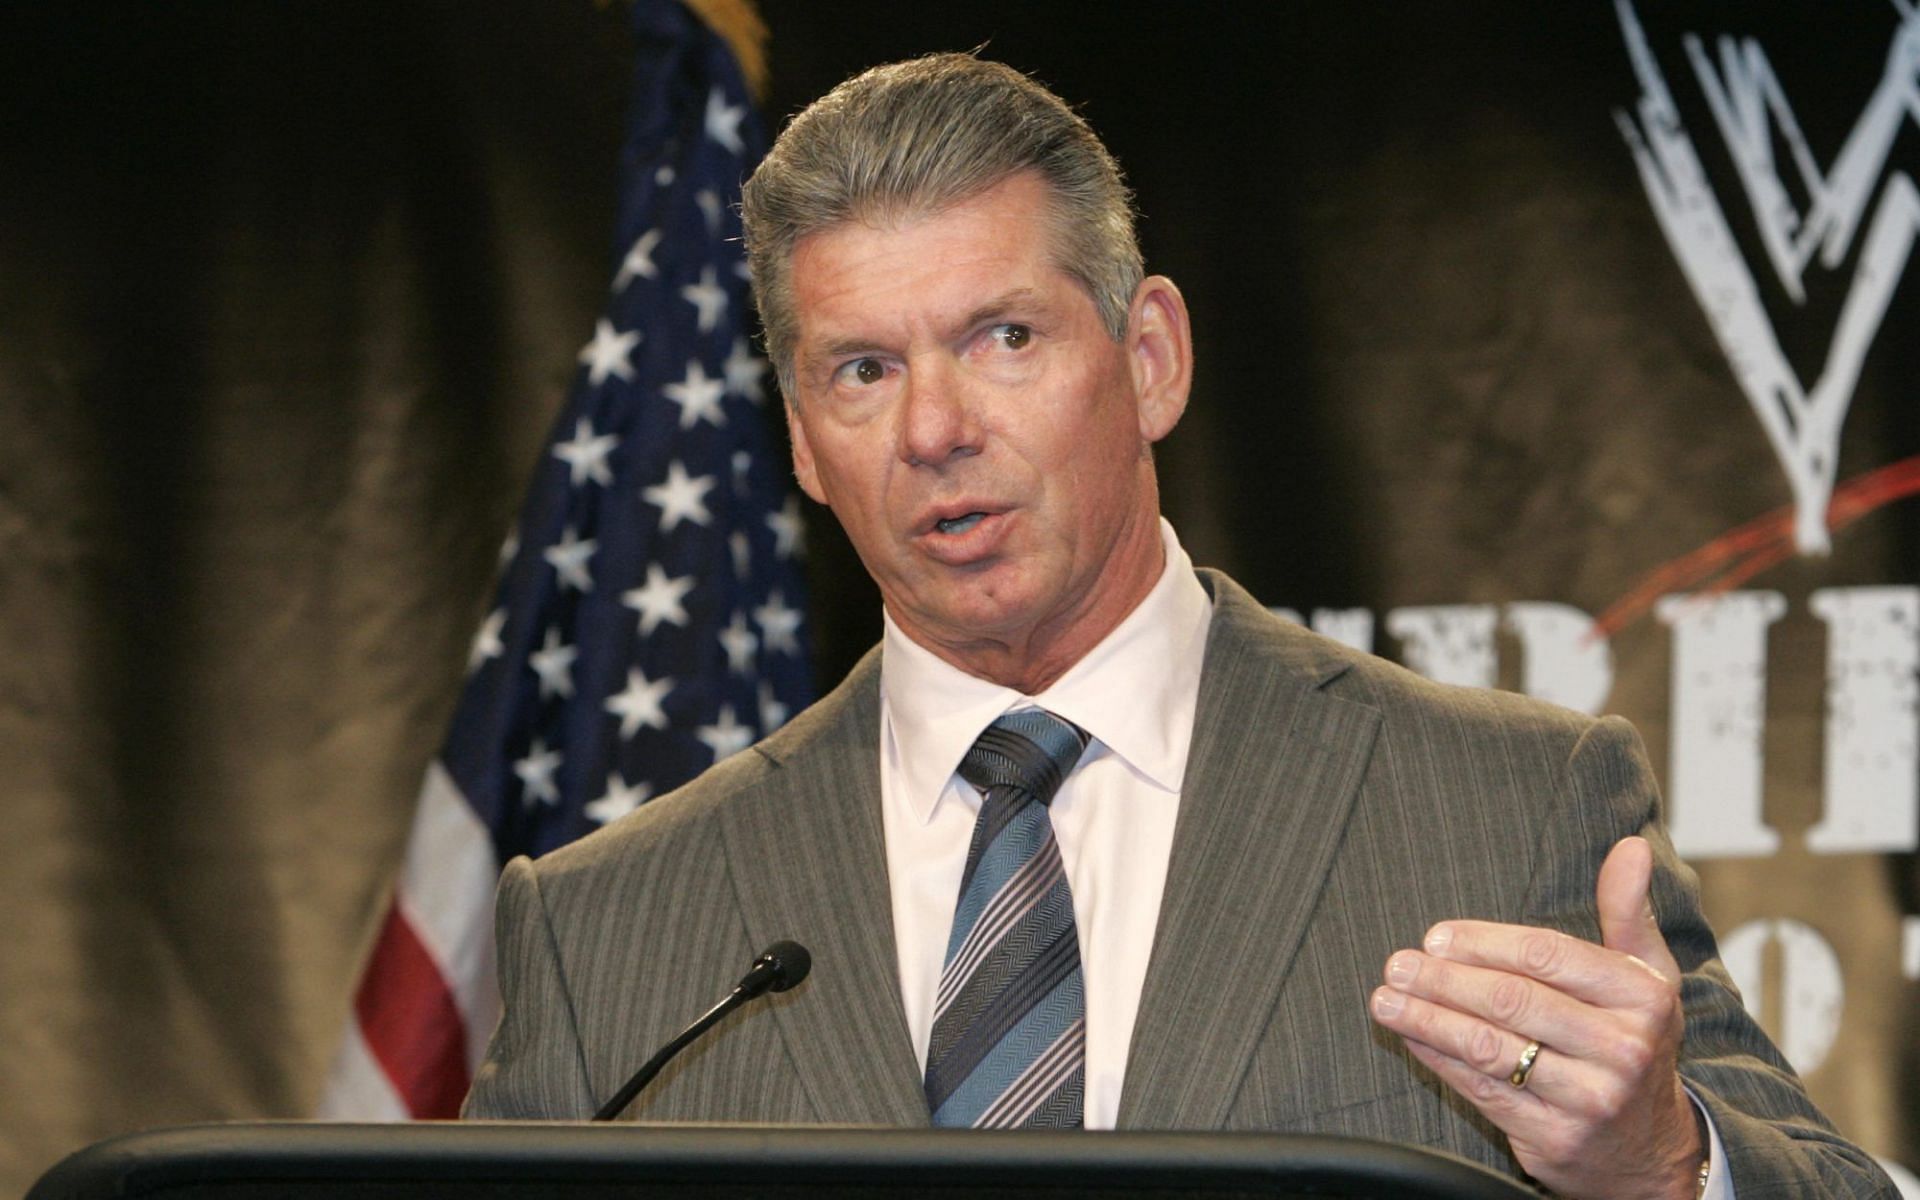 Vince McMahon is the Chairman and CEO of WWE